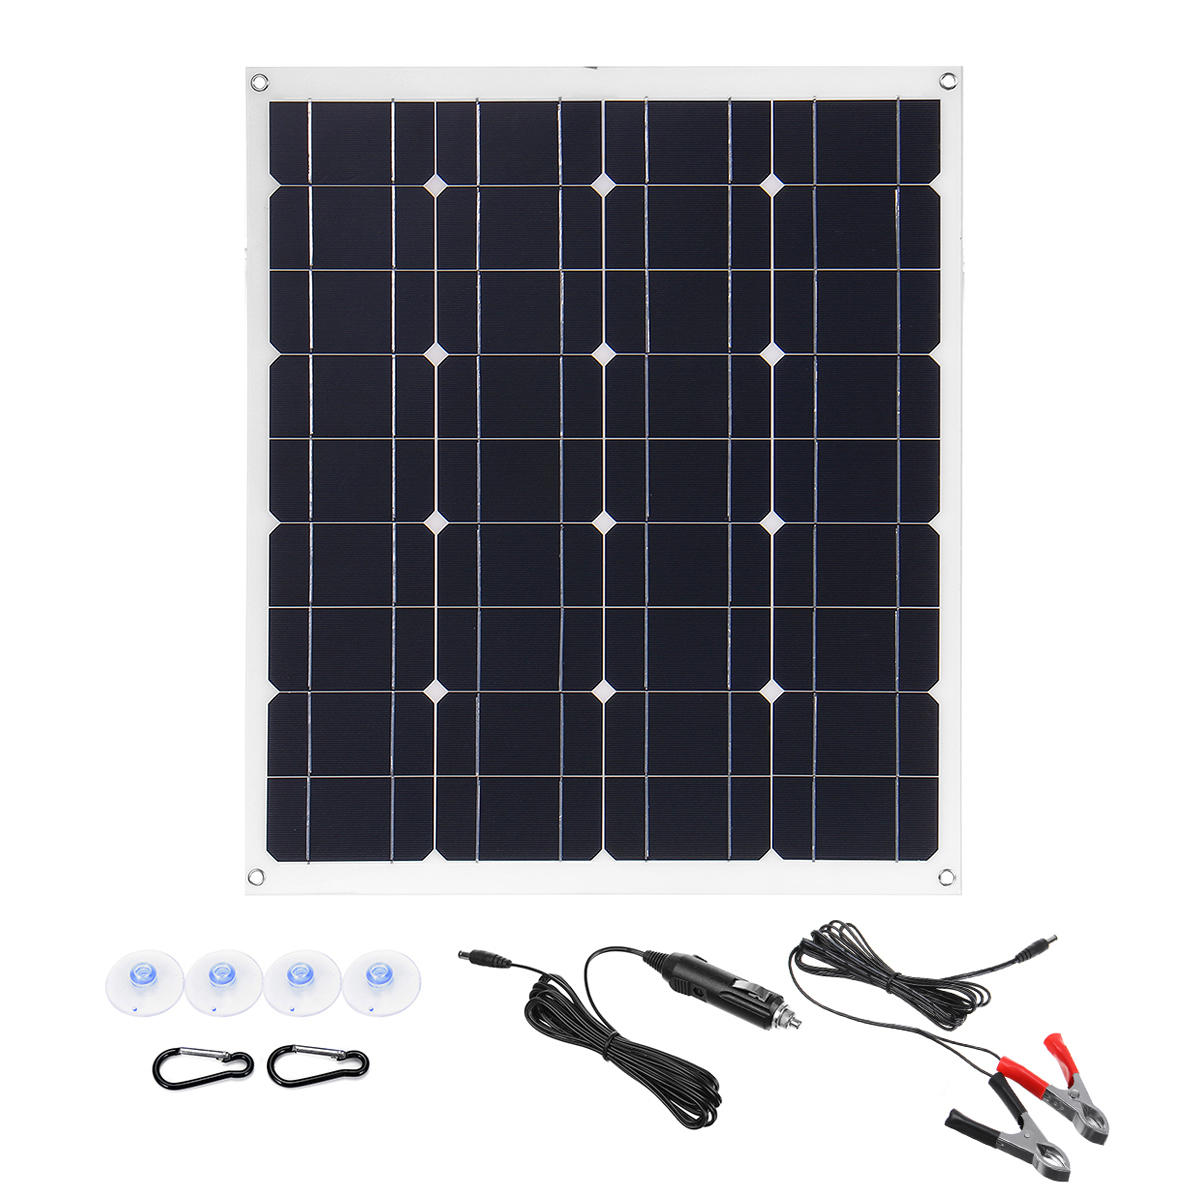 50W 620x540mm Single USB 12V 5V Solar Panel with Cables